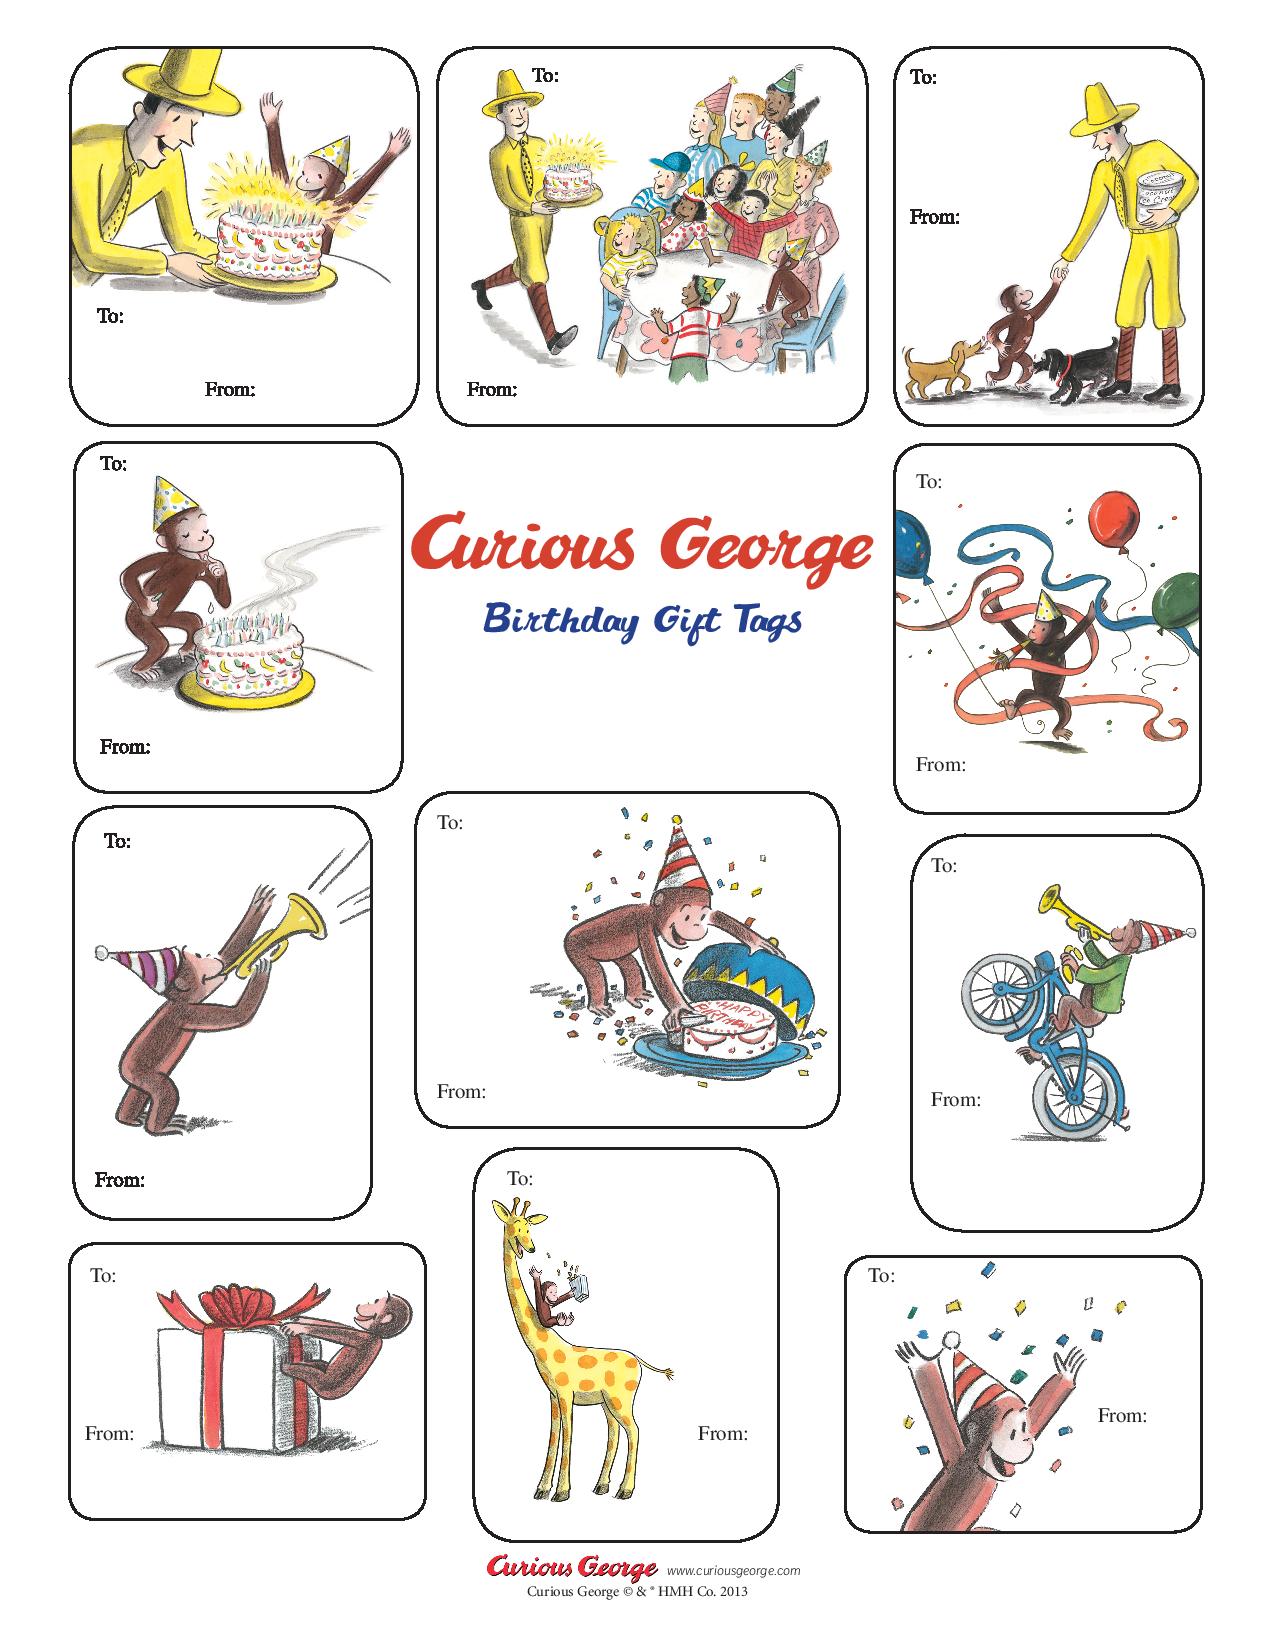 Curious George Birthday Gift Tags